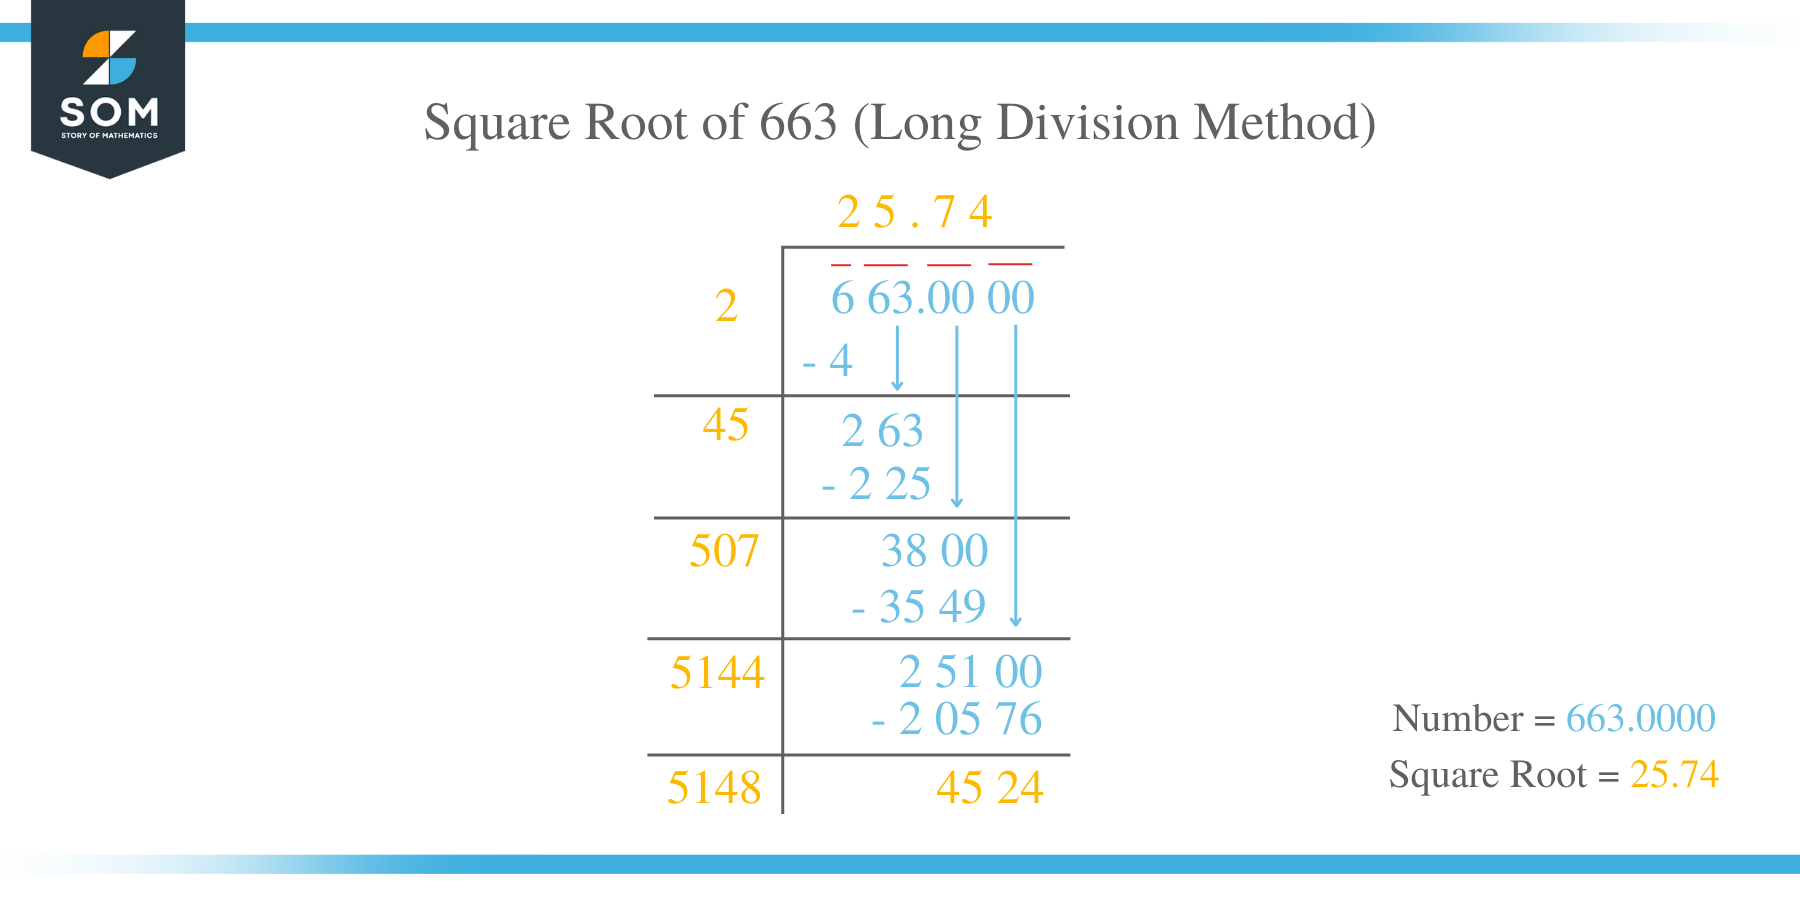 Square Root of 663 by Long Division Method